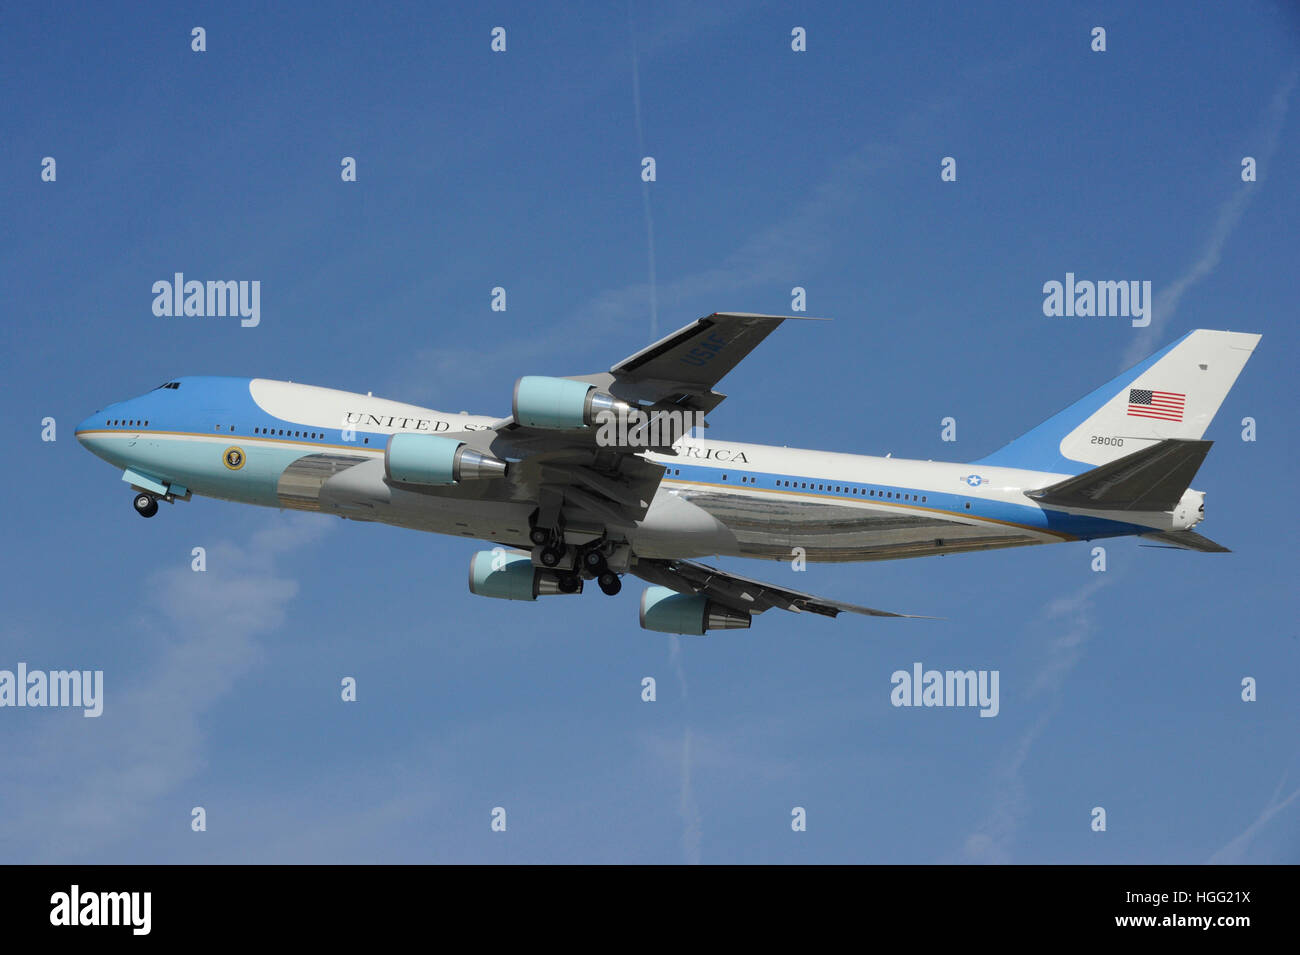 Air Force One take off flying high in the sky at LAX Airport on February 12th, 2016 in Los Angeles, California. Stock Photo